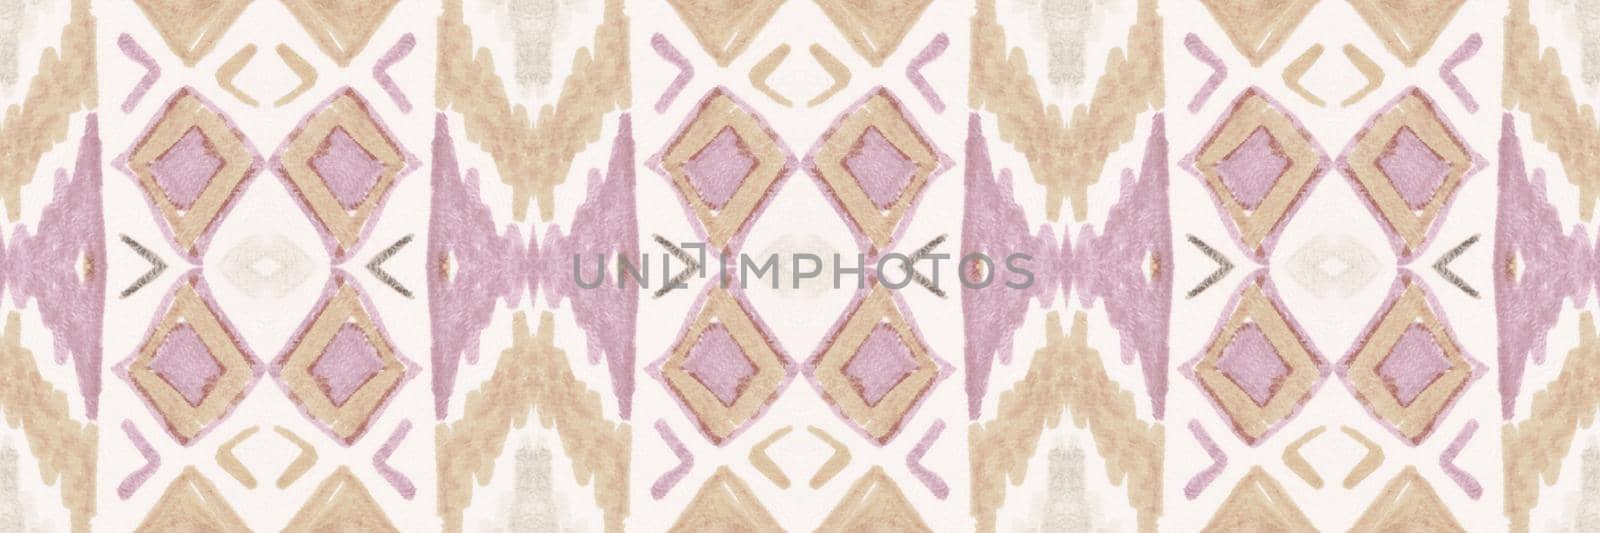 Geometric ethnic pattern. Mexico motif design. Art tribal background. Grunge aztec african ornament. Seamless ethnic pattern. Traditional navajo texture. Vintage american illustration.